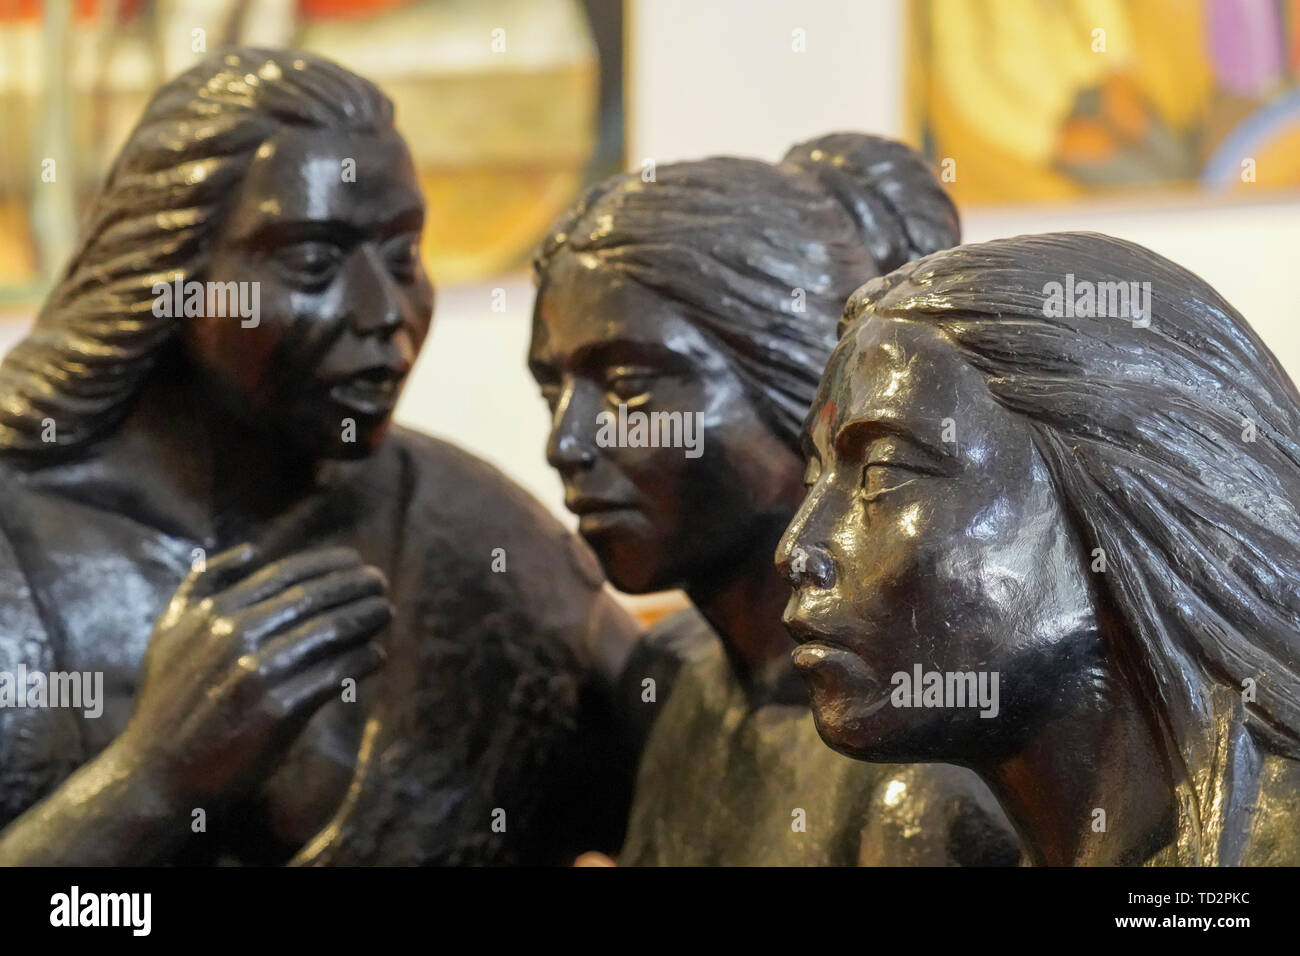 close up details of a bronze Sculpture by Mario Aguirre Roa at the Ralli Museum in Caesarea, Israel. Stock Photo